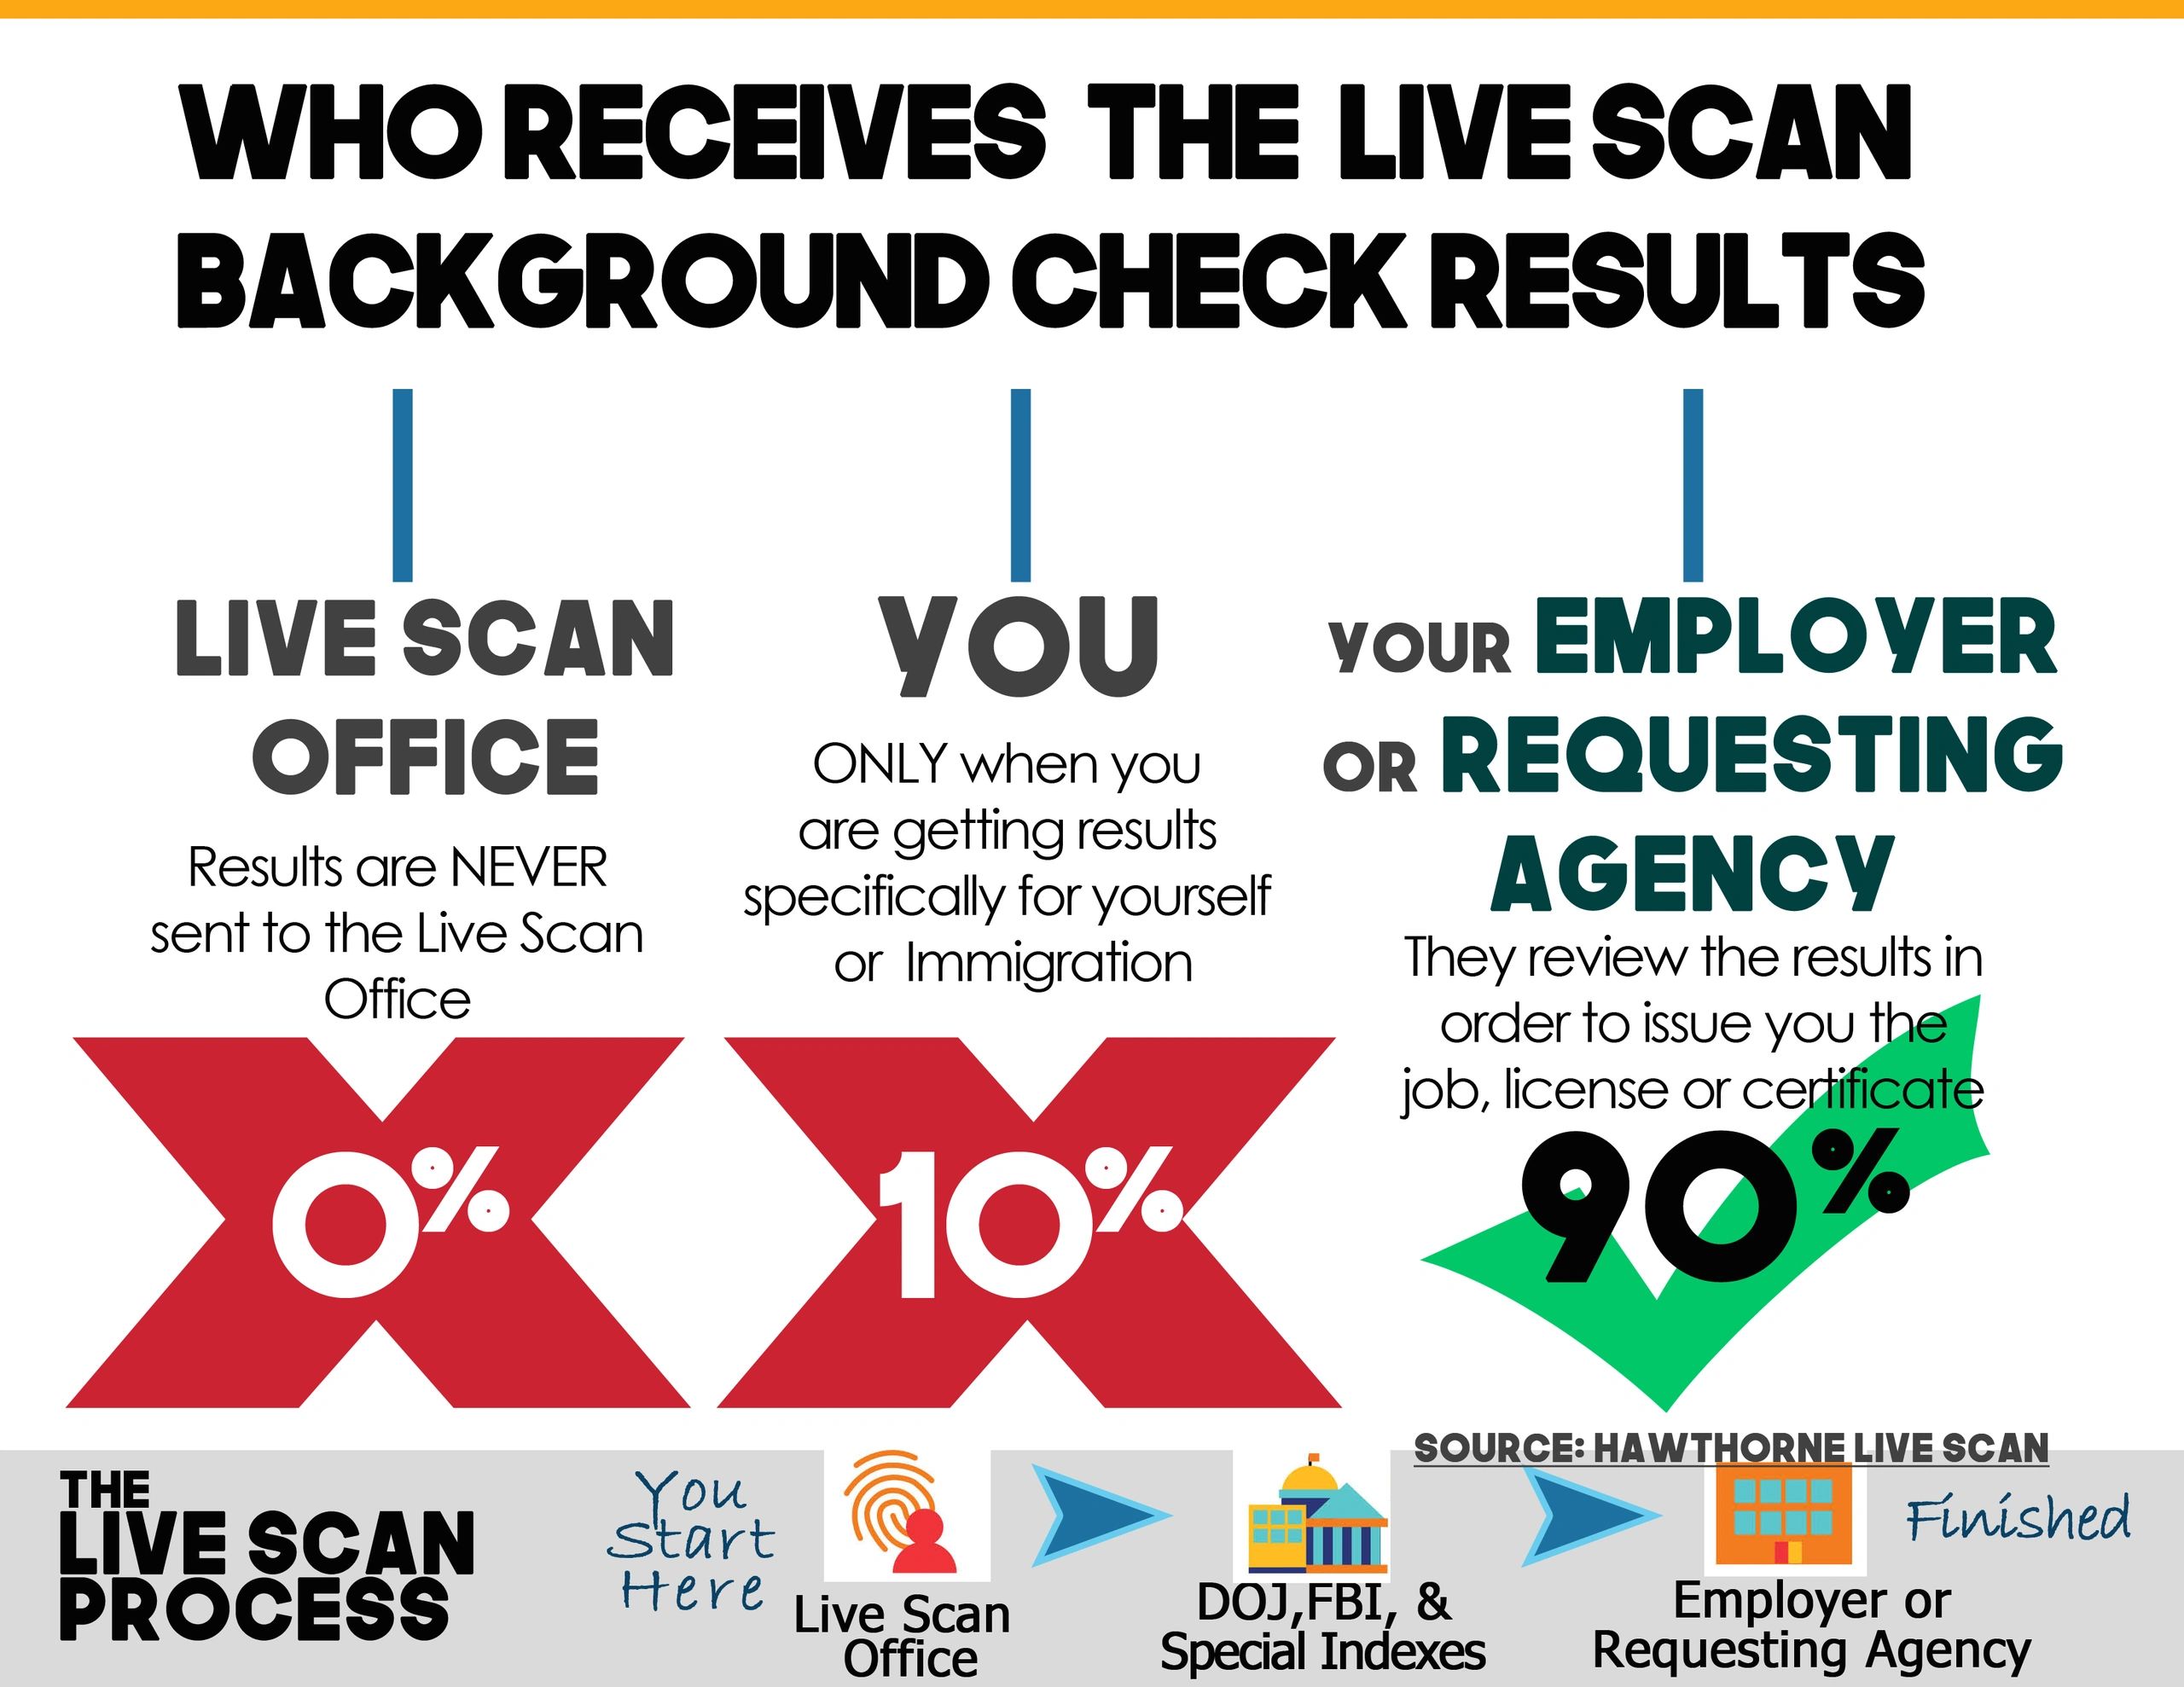 What to do when live scan results taking too long?